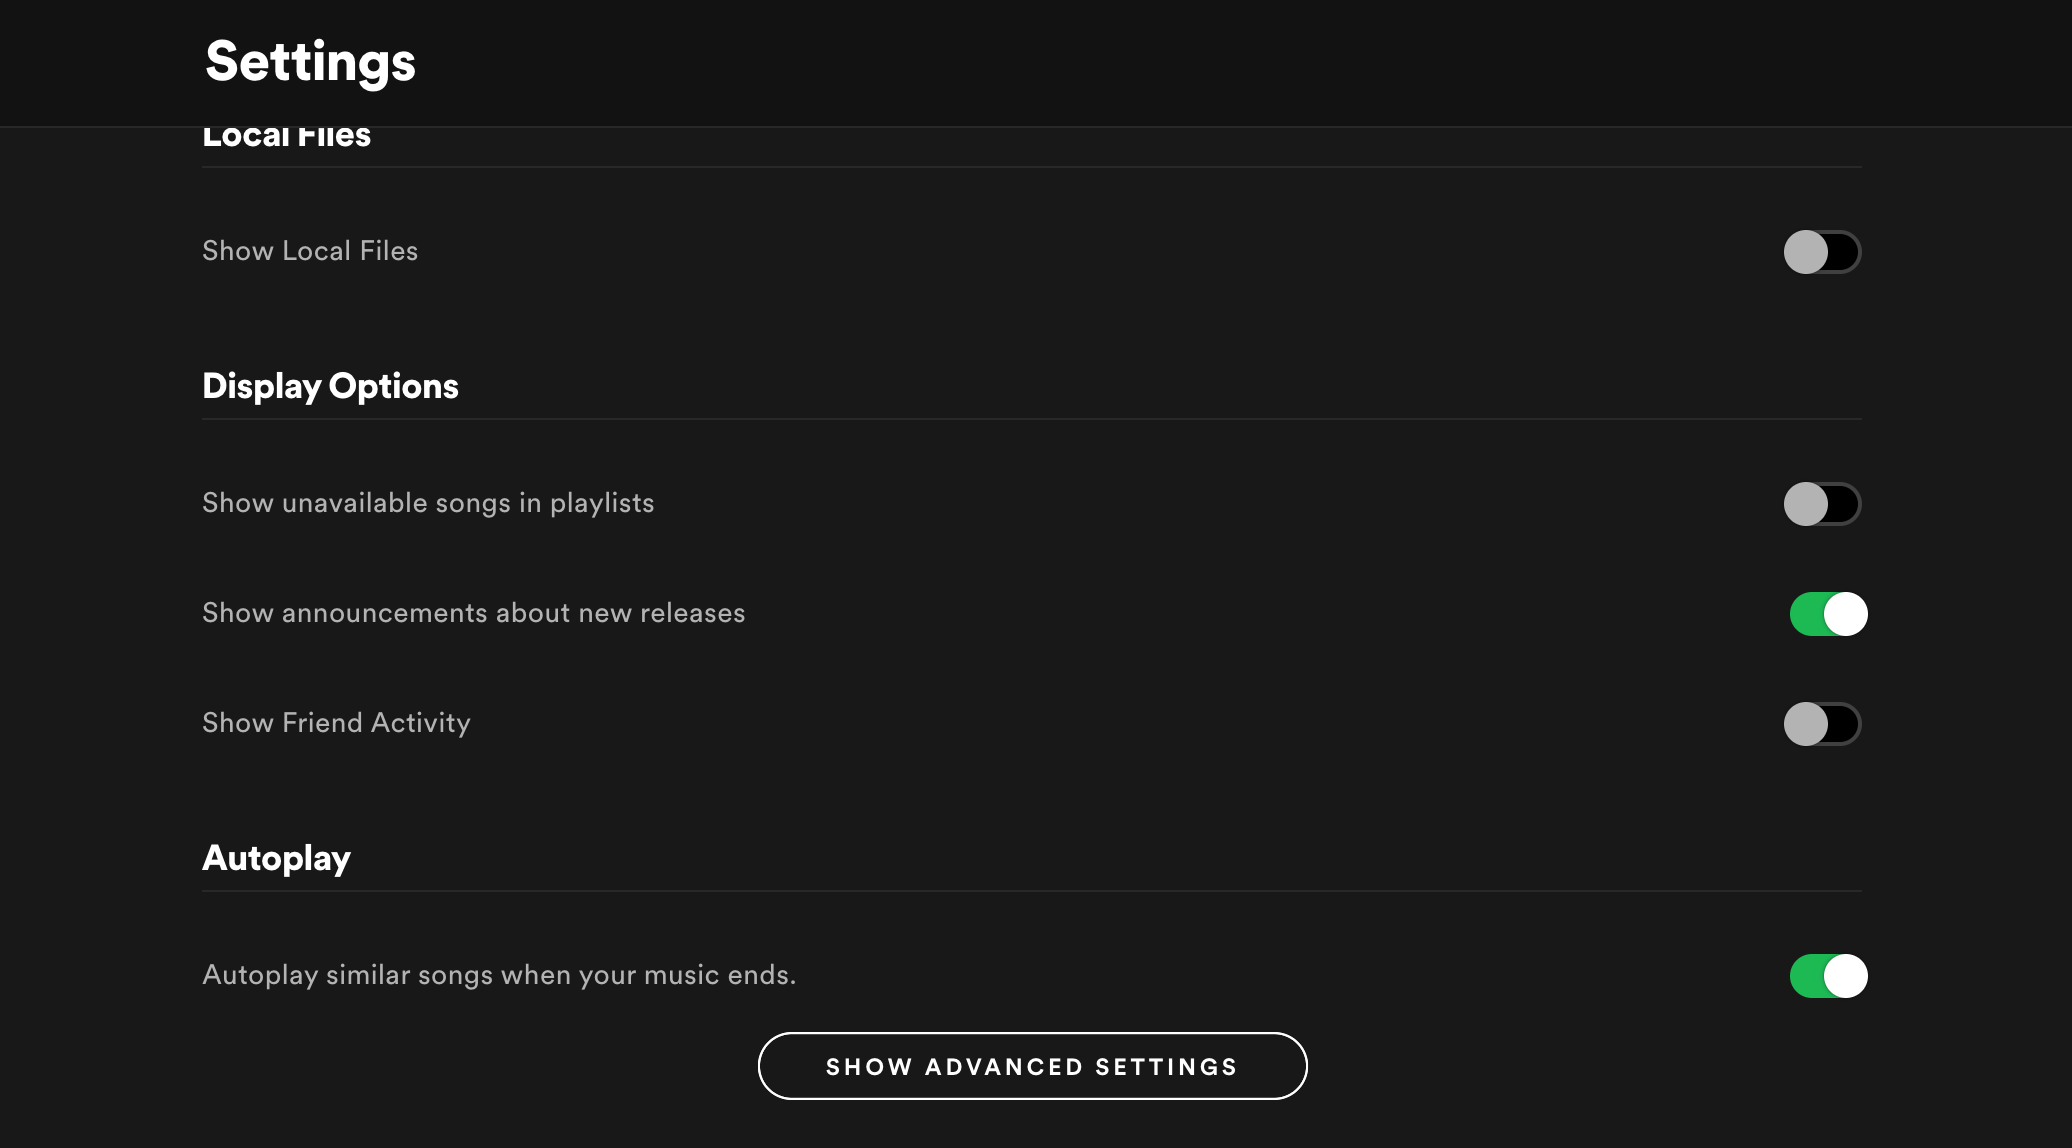 Show Advanced Settings on Spotify